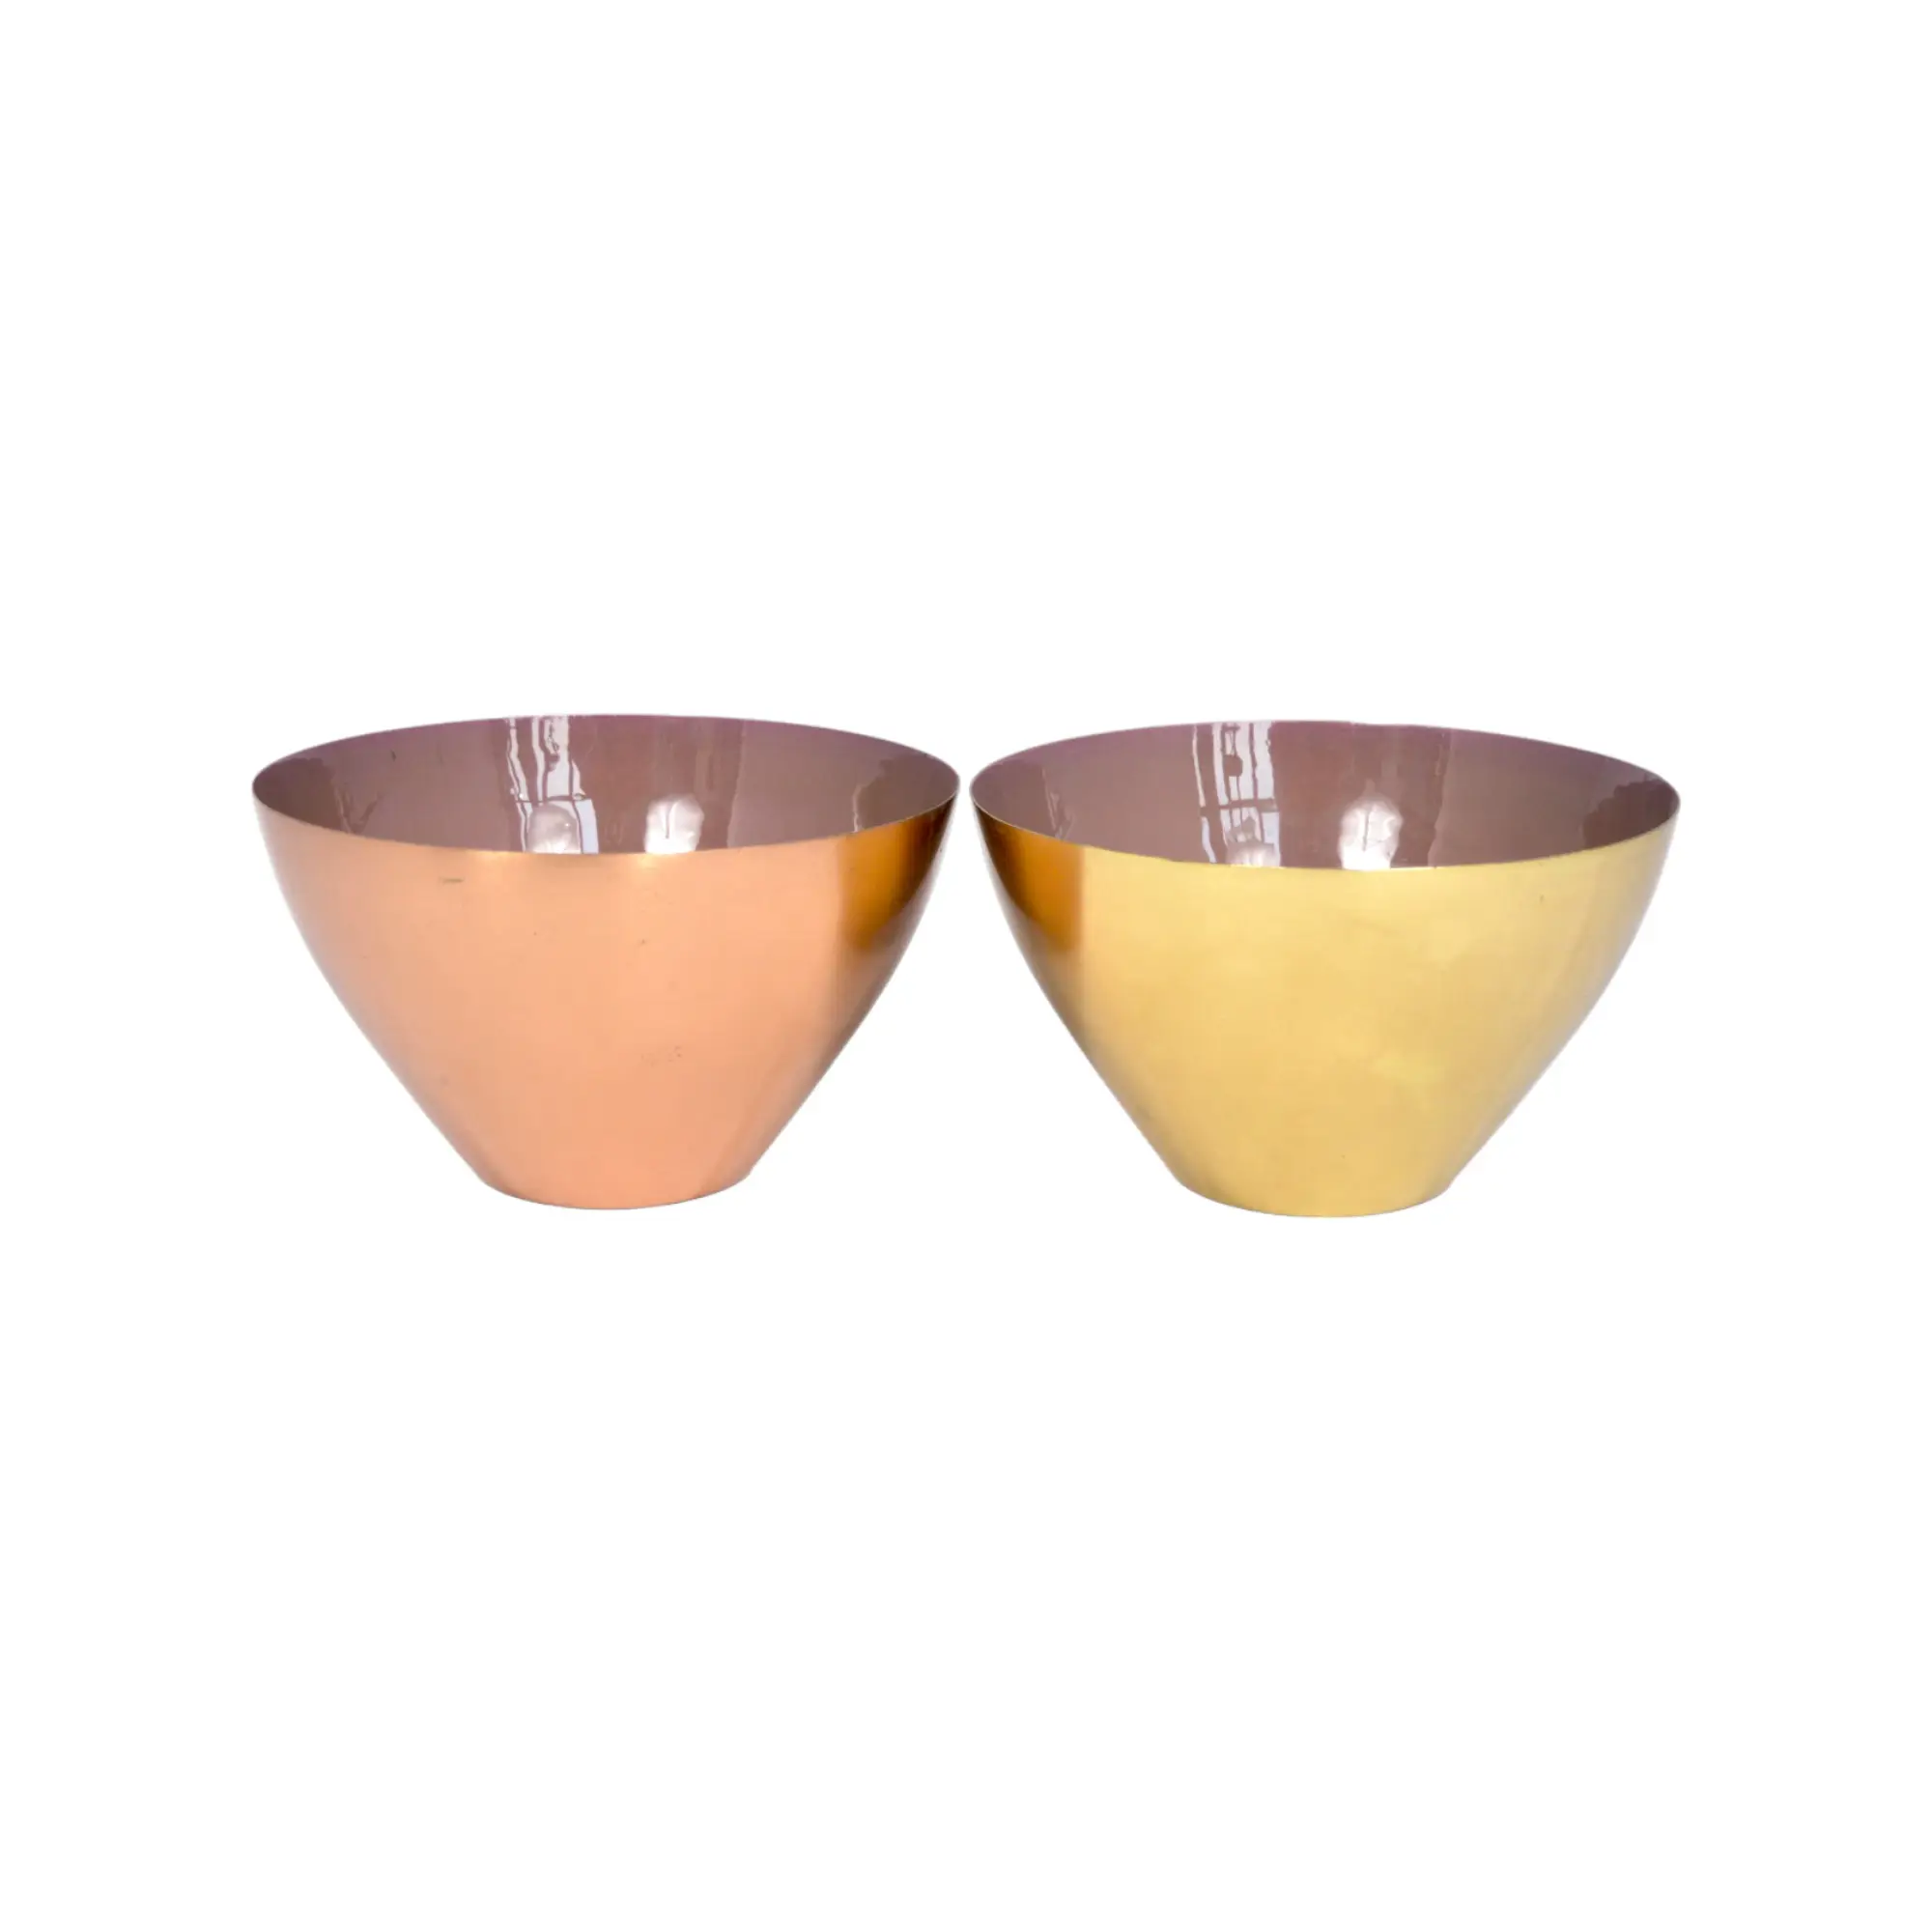 Metal Iron Set of 2 Tone Mirror Enamel Polished Cheap Metal Salad Bowls with Rustic Copper and Gold Plating home Usage Bowl